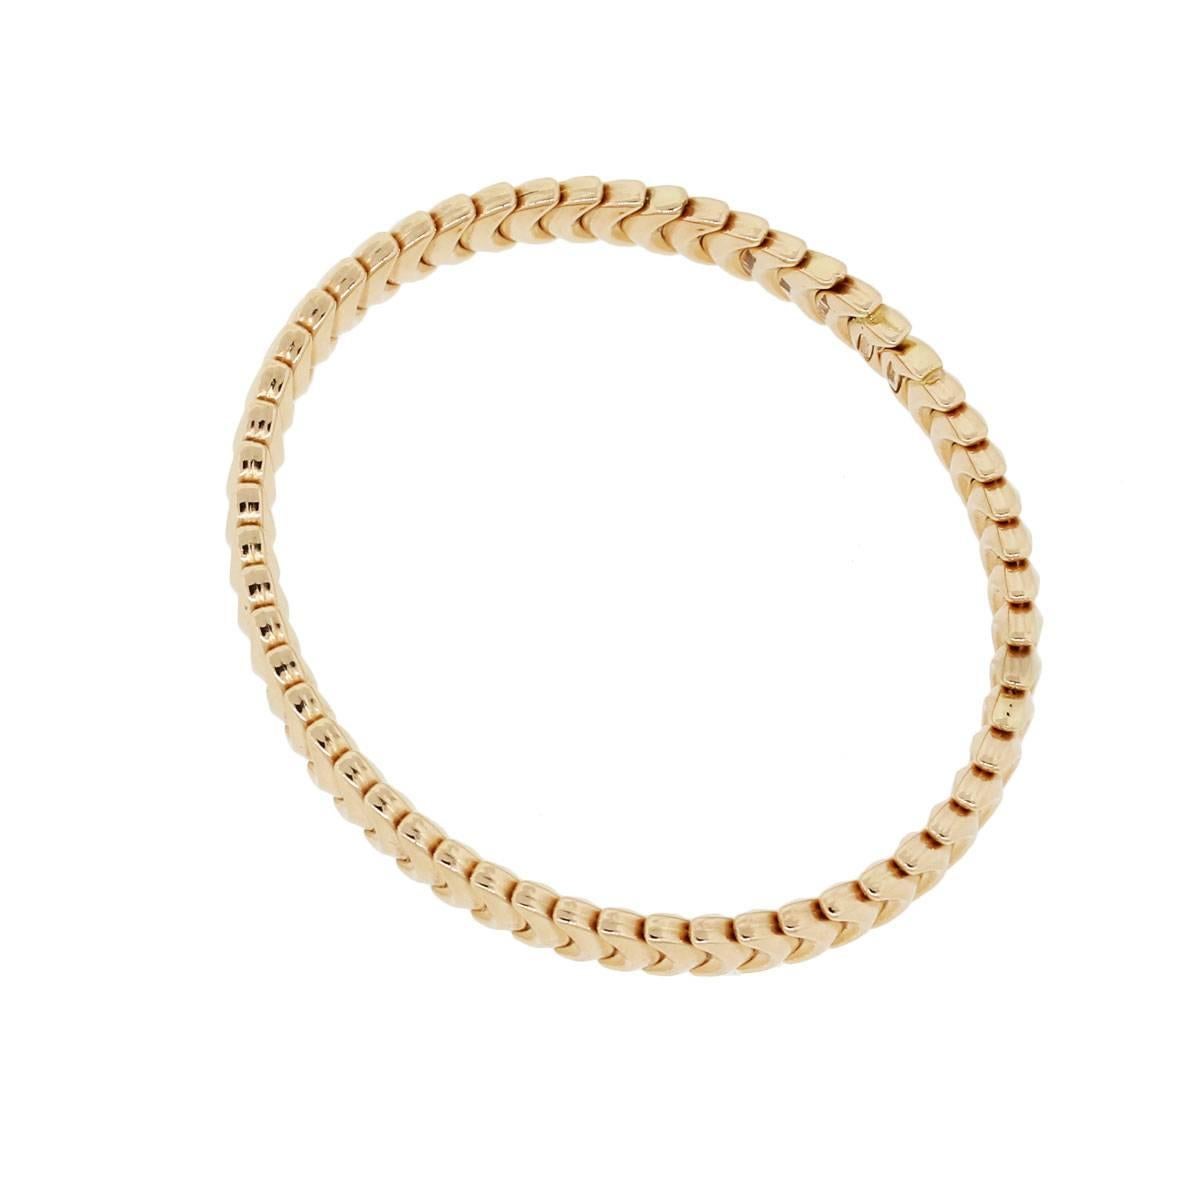 Designer: Chimento
Material: 18k rose gold
Fastening: Open clasp
Measurements: Will fit a 6.25″ wrist
Item Weight: 11.5g (7.4dwt)
Additional Details: This item comes complete with a presentation box!
SKU: G7569